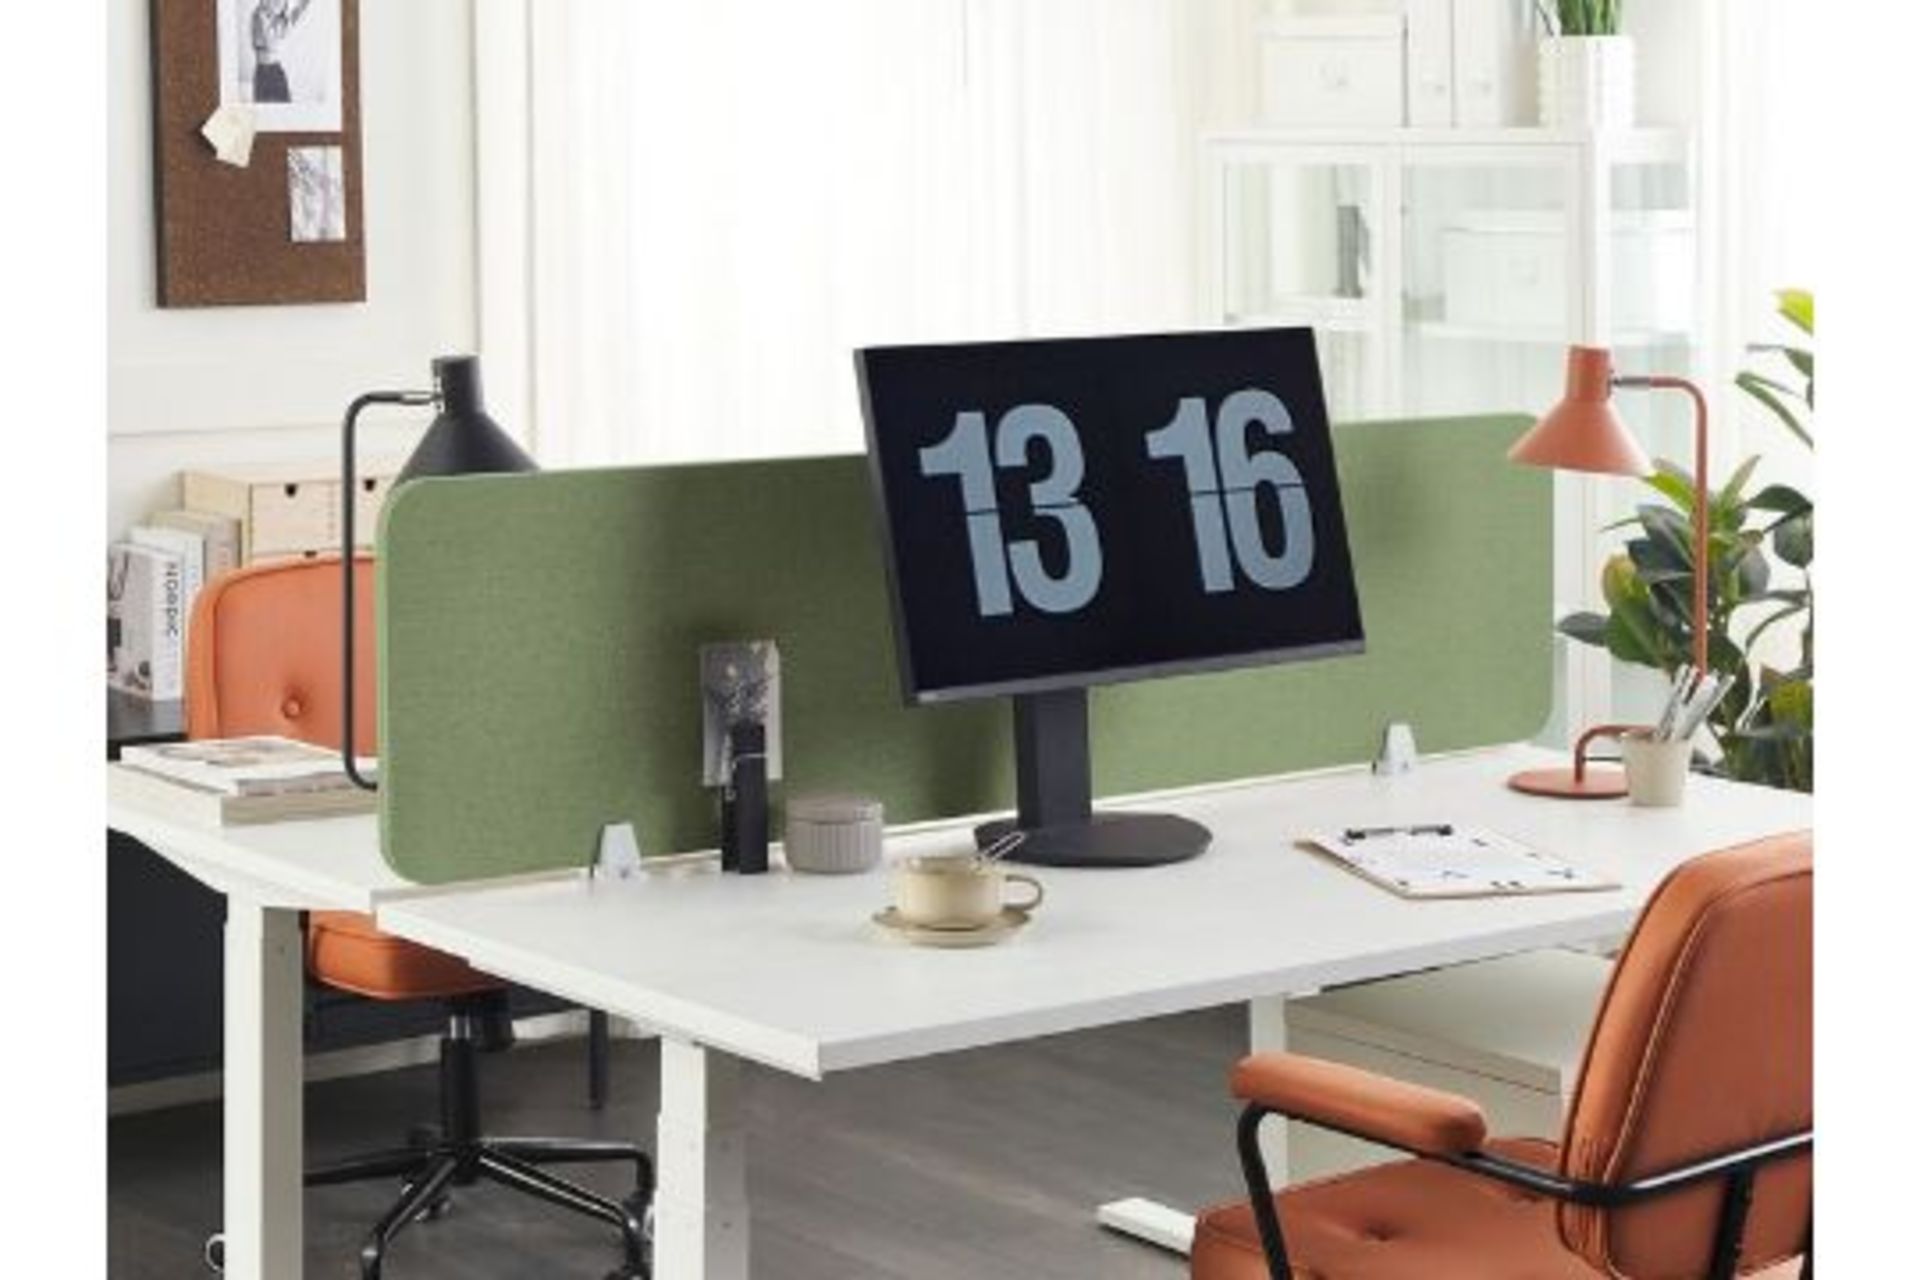 Wally Desk Screen 130 x 40 cm Green 16/12. - ER24. RRP £239.99. Want to set boundaries for your